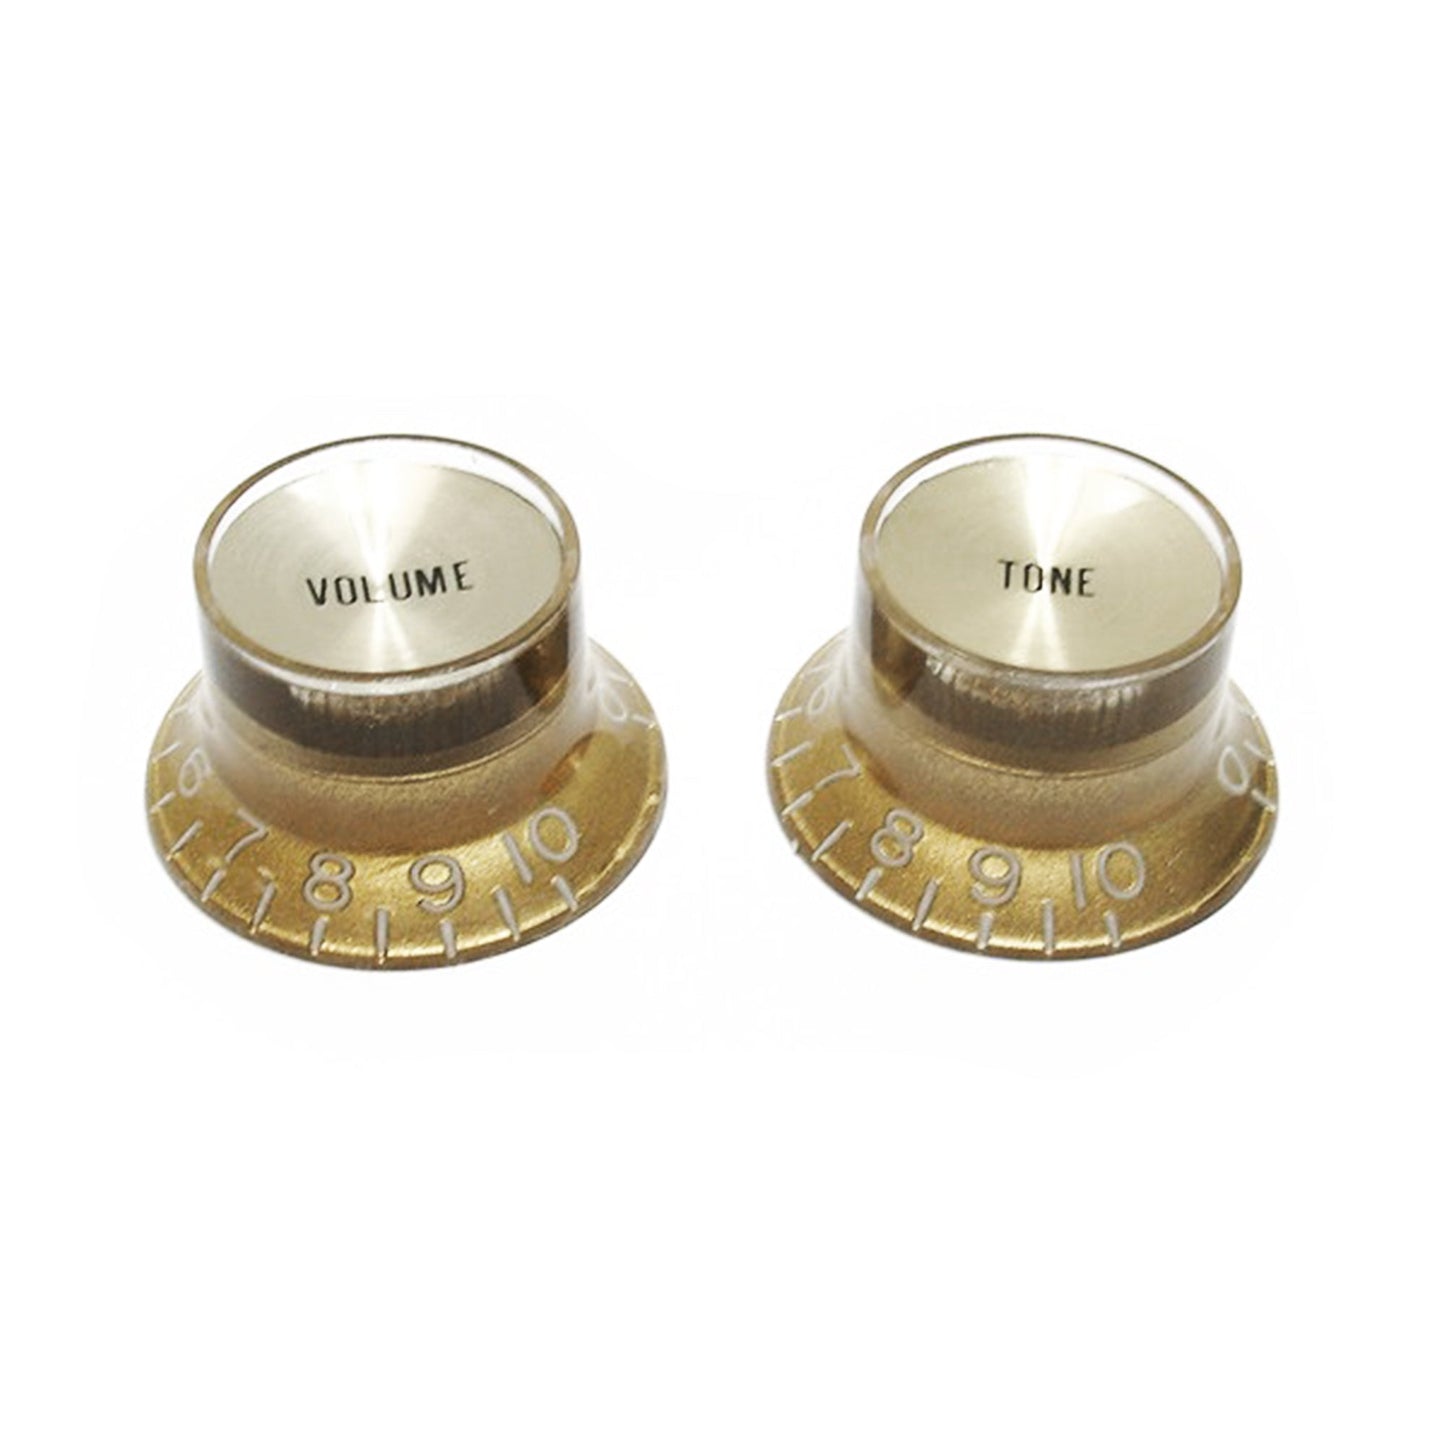 Metric Reflector Bell Knobs - Set of 2